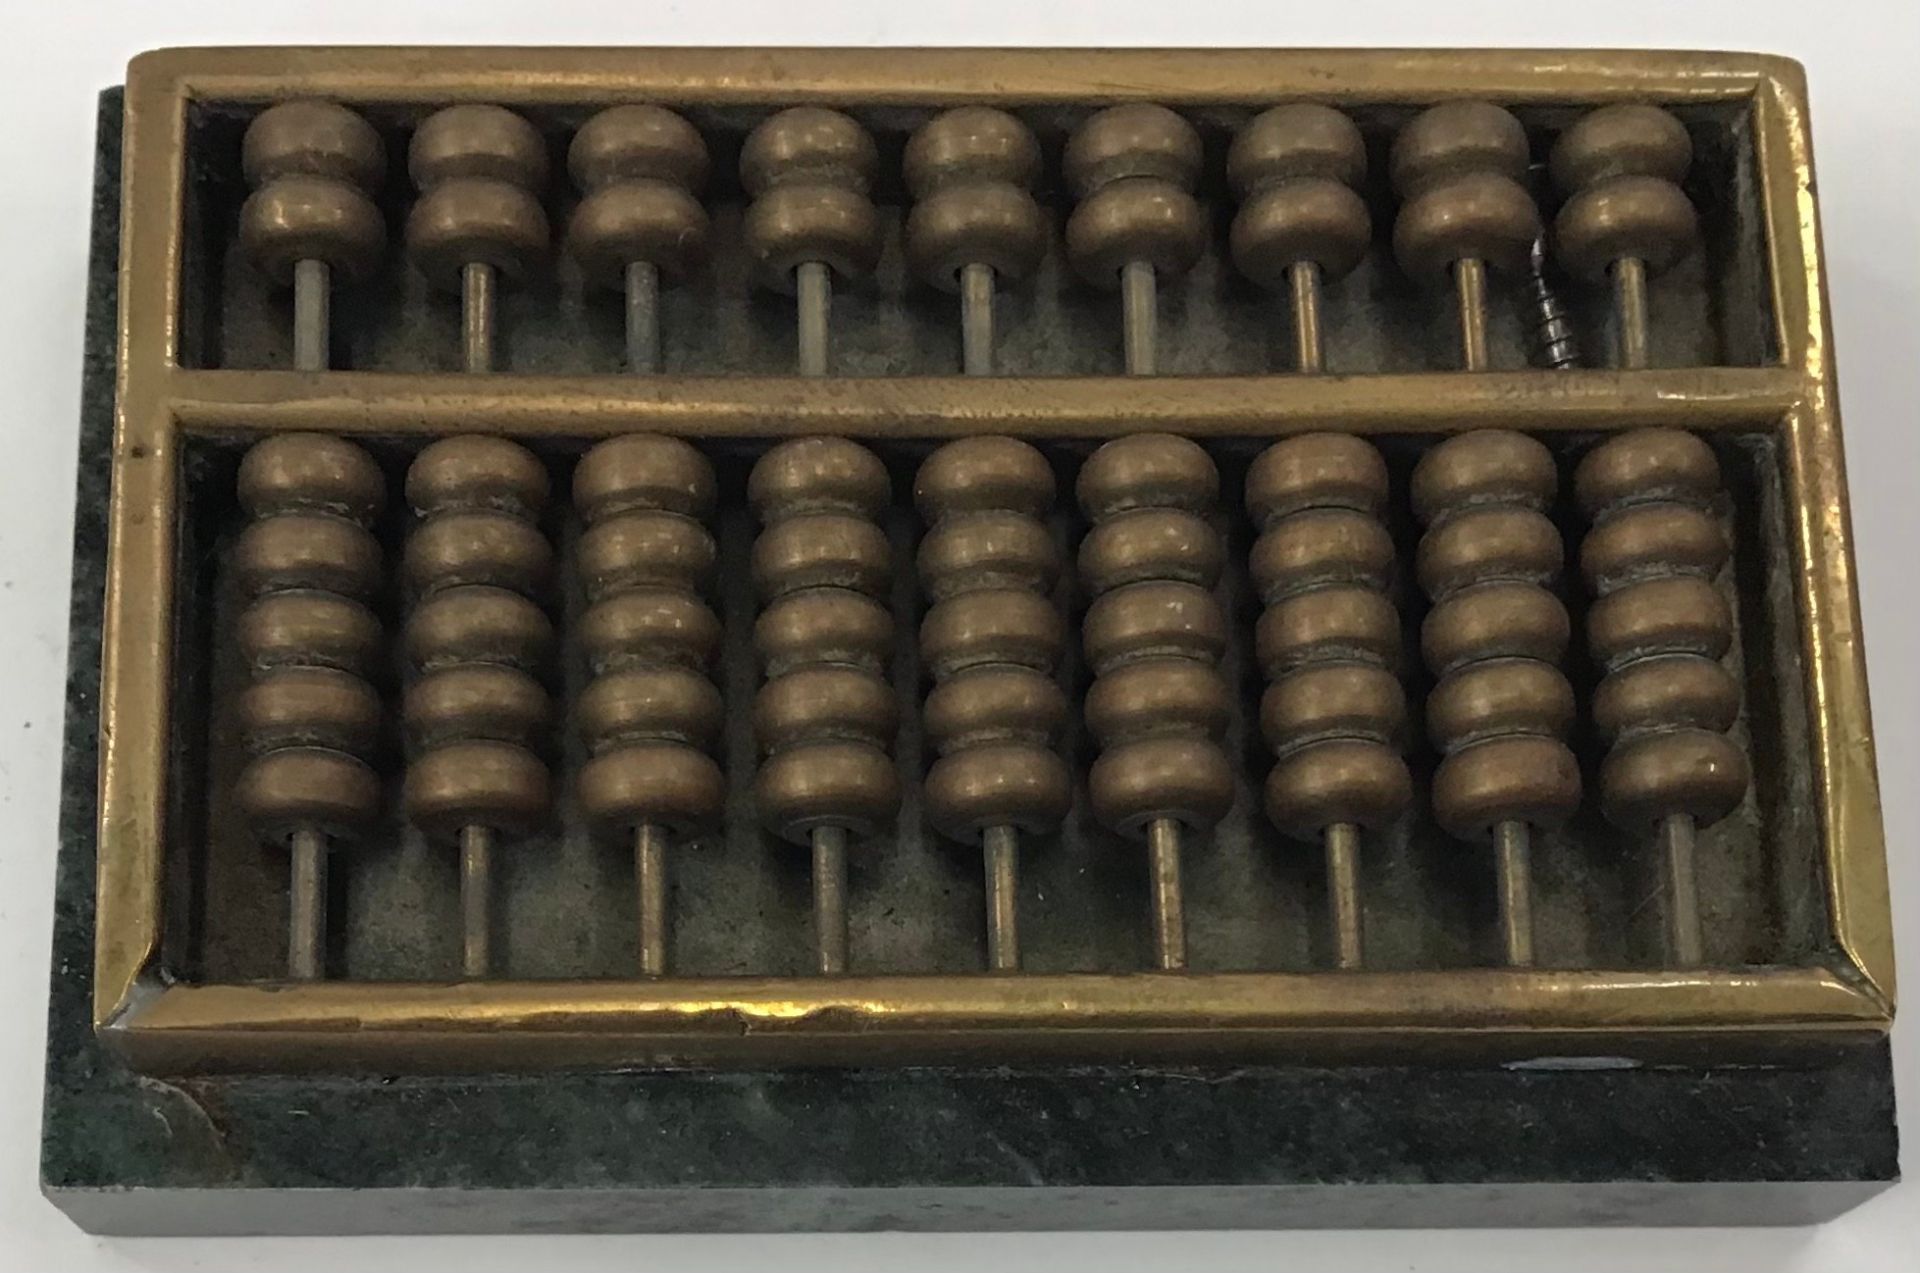 Vintage brass abacus together with a company stamp - Image 5 of 5